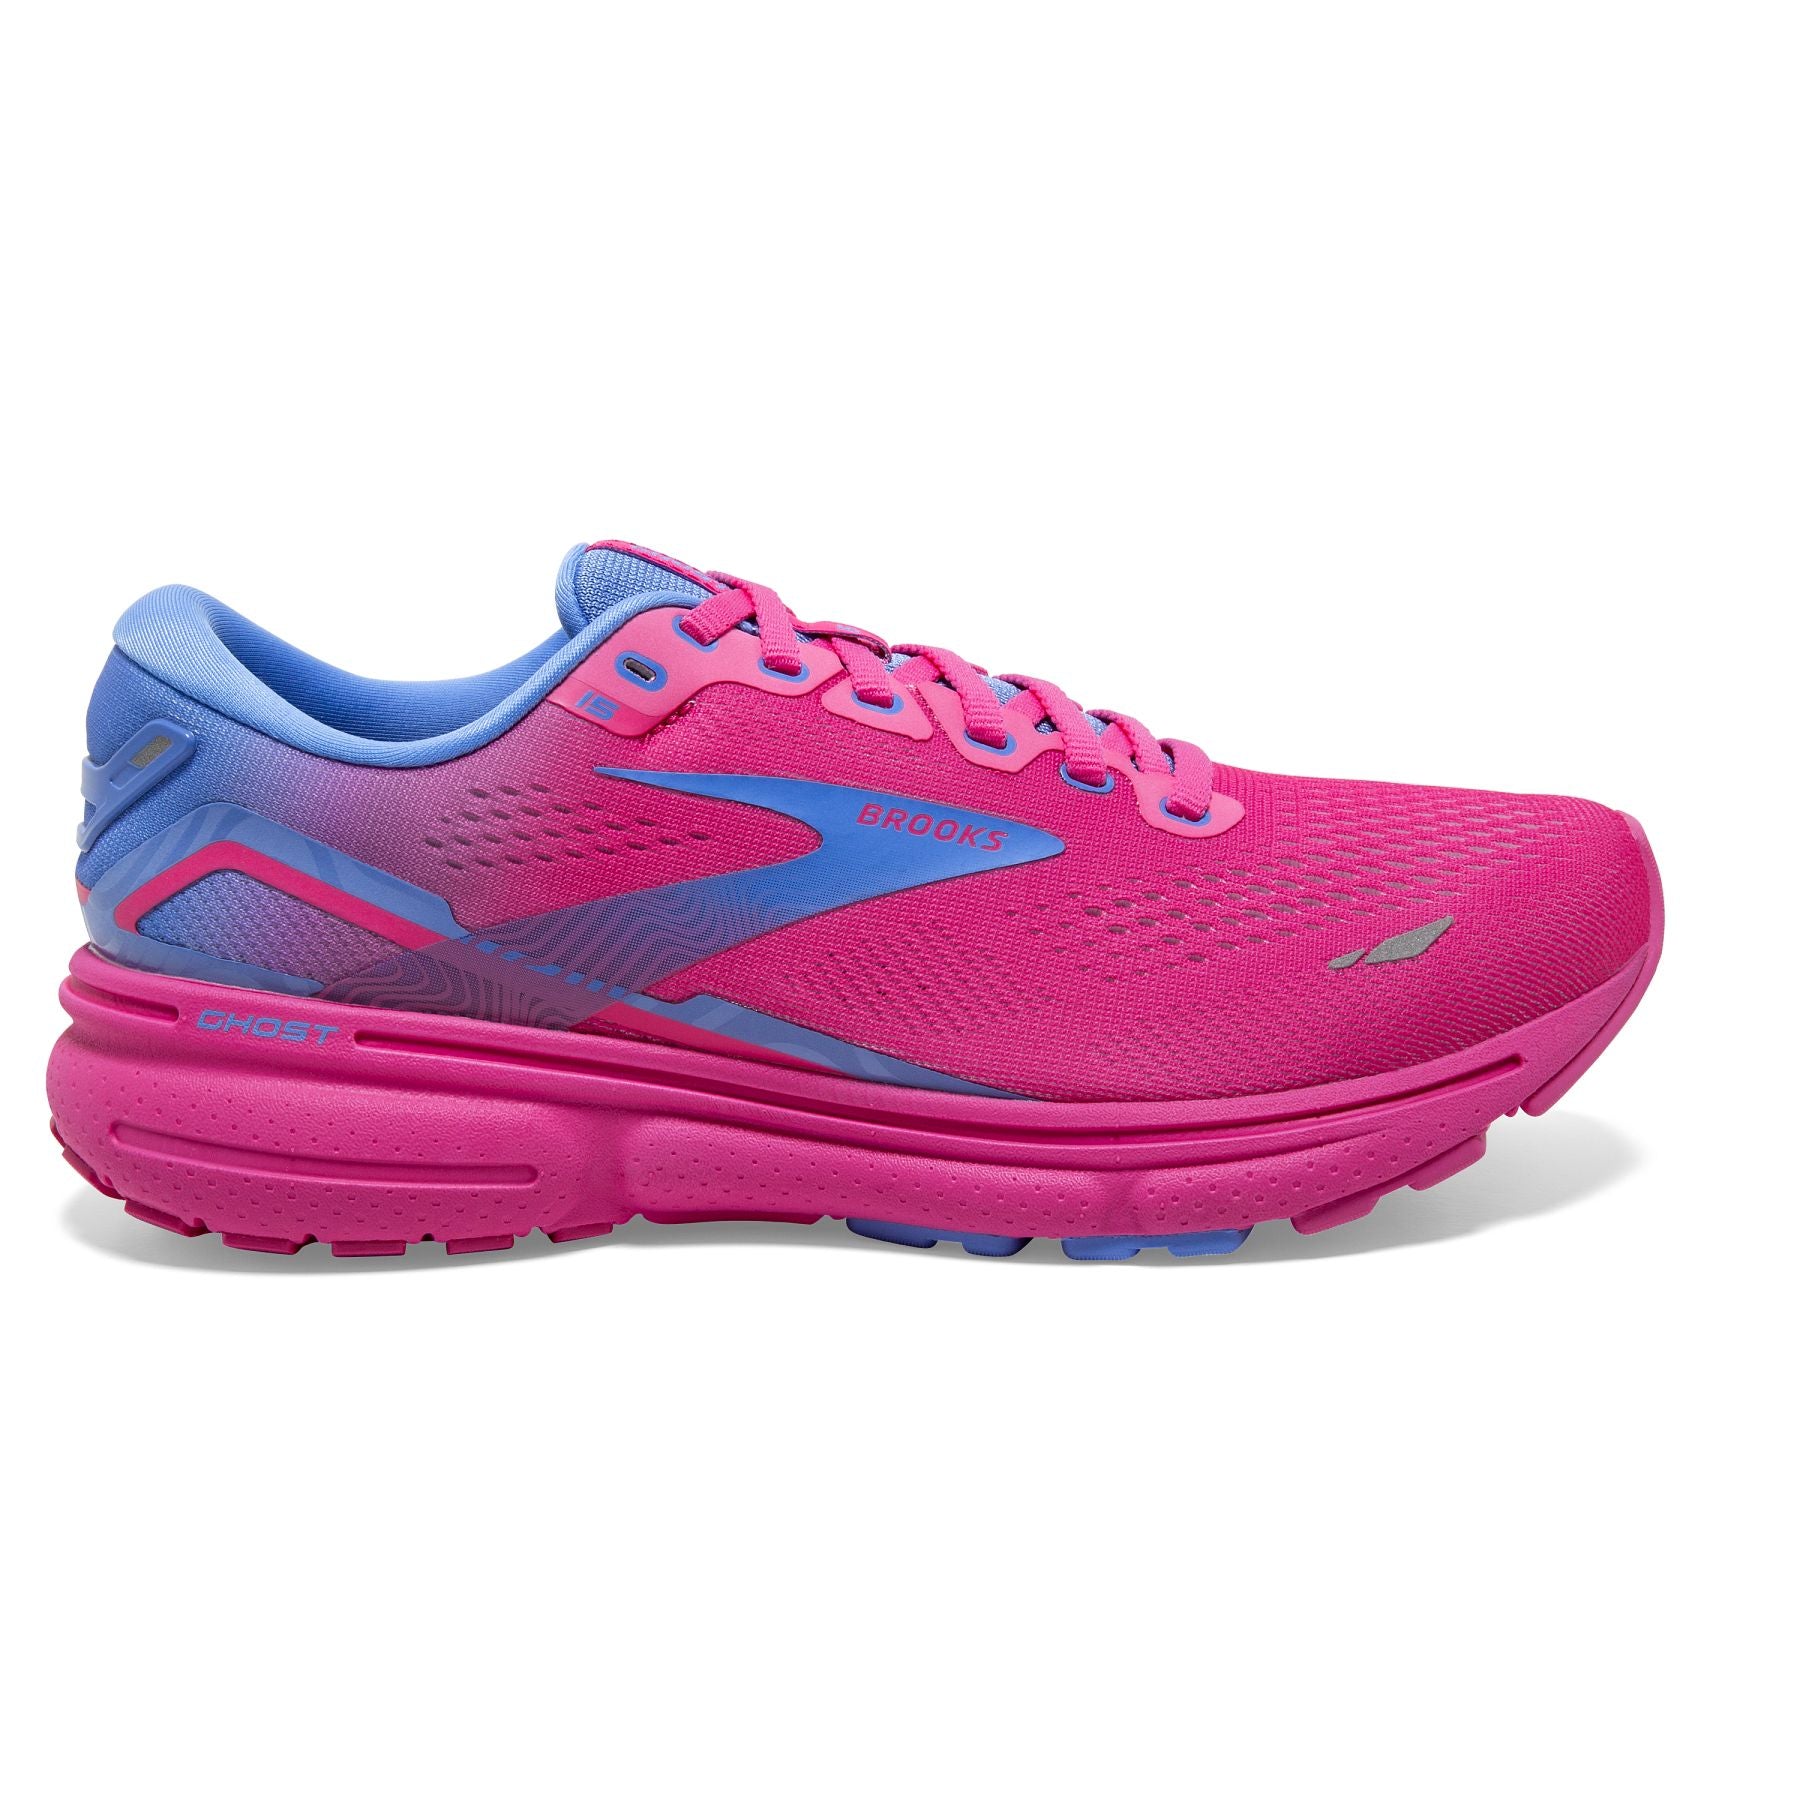 Lateral view of the Women's Ghost 15 by Brooks in the color Pink Glo/Blue/Fuchsia